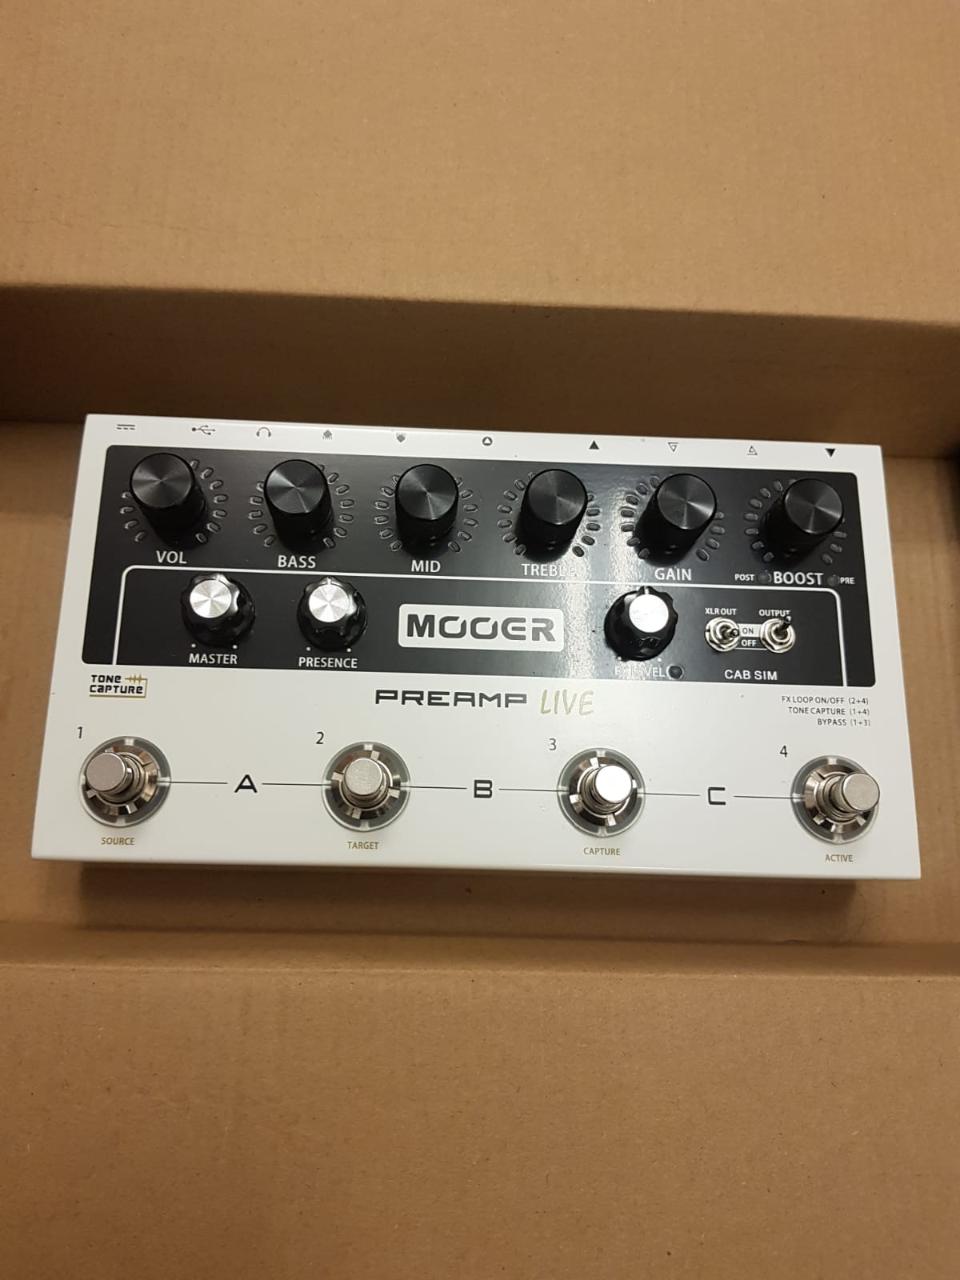 MOOER PREAMP LIVE